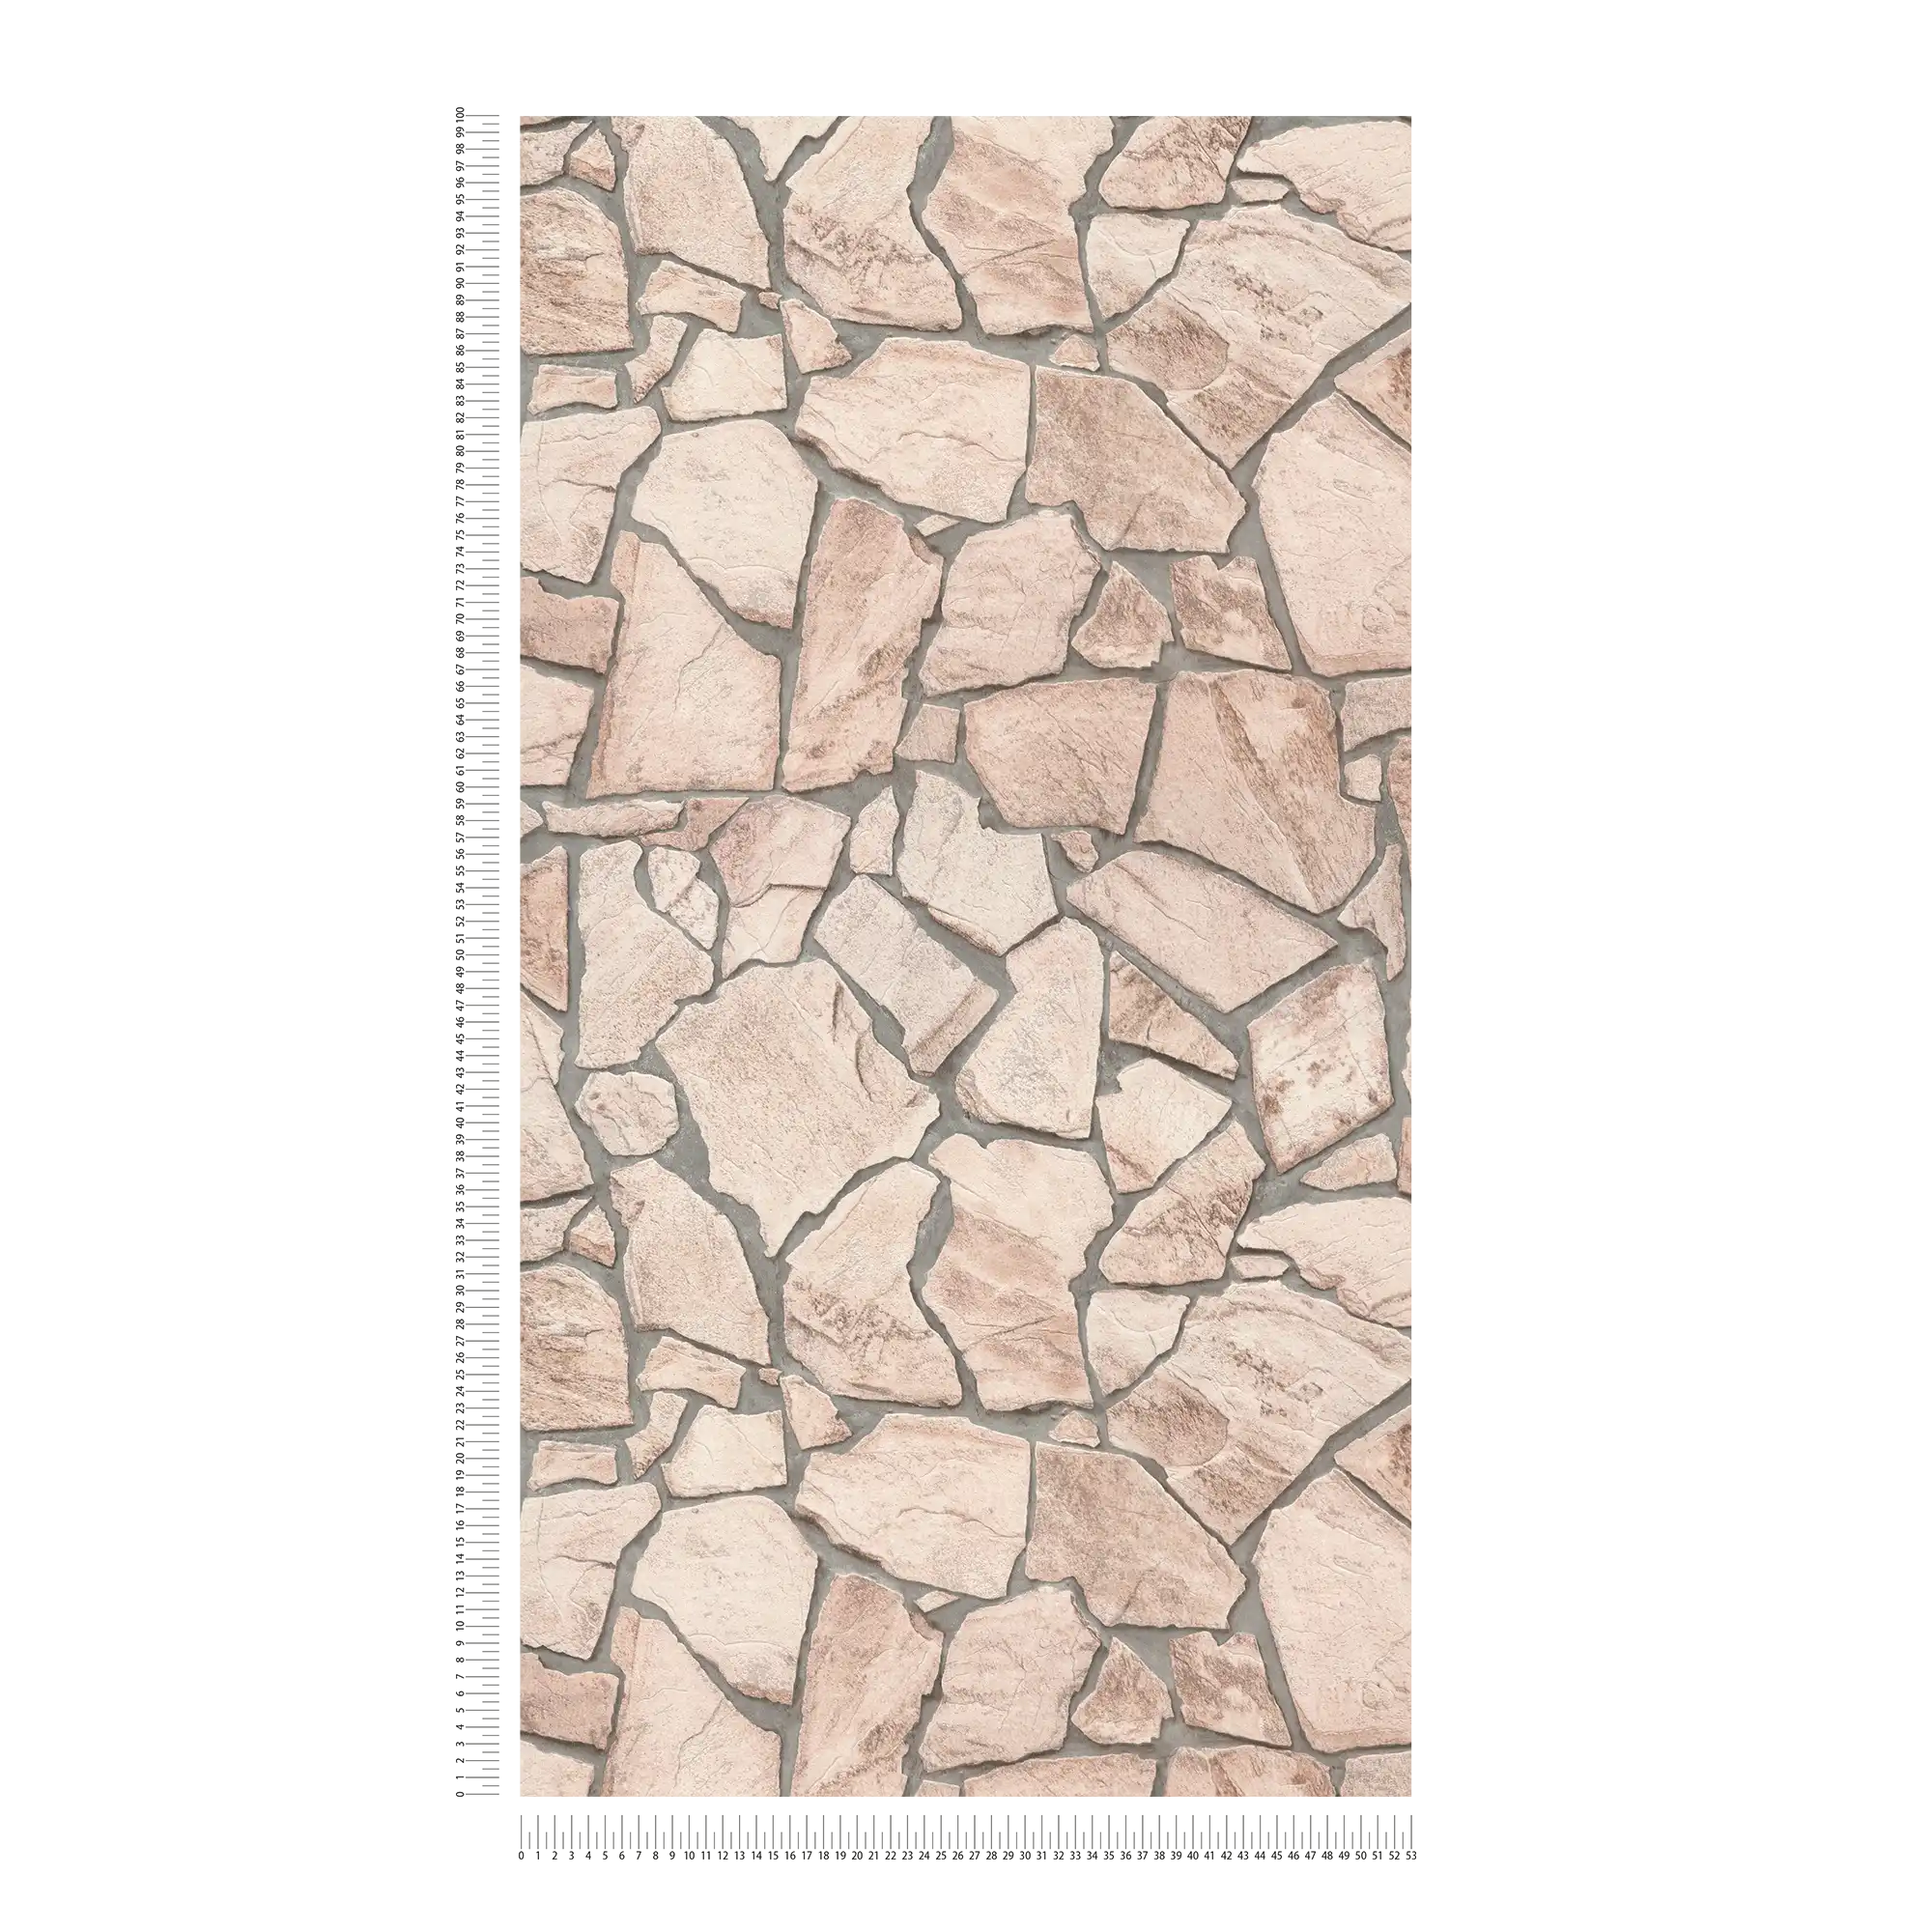             Stone wallpaper 3D effect, realistic natural stone pattern - beige, grey, brown
        